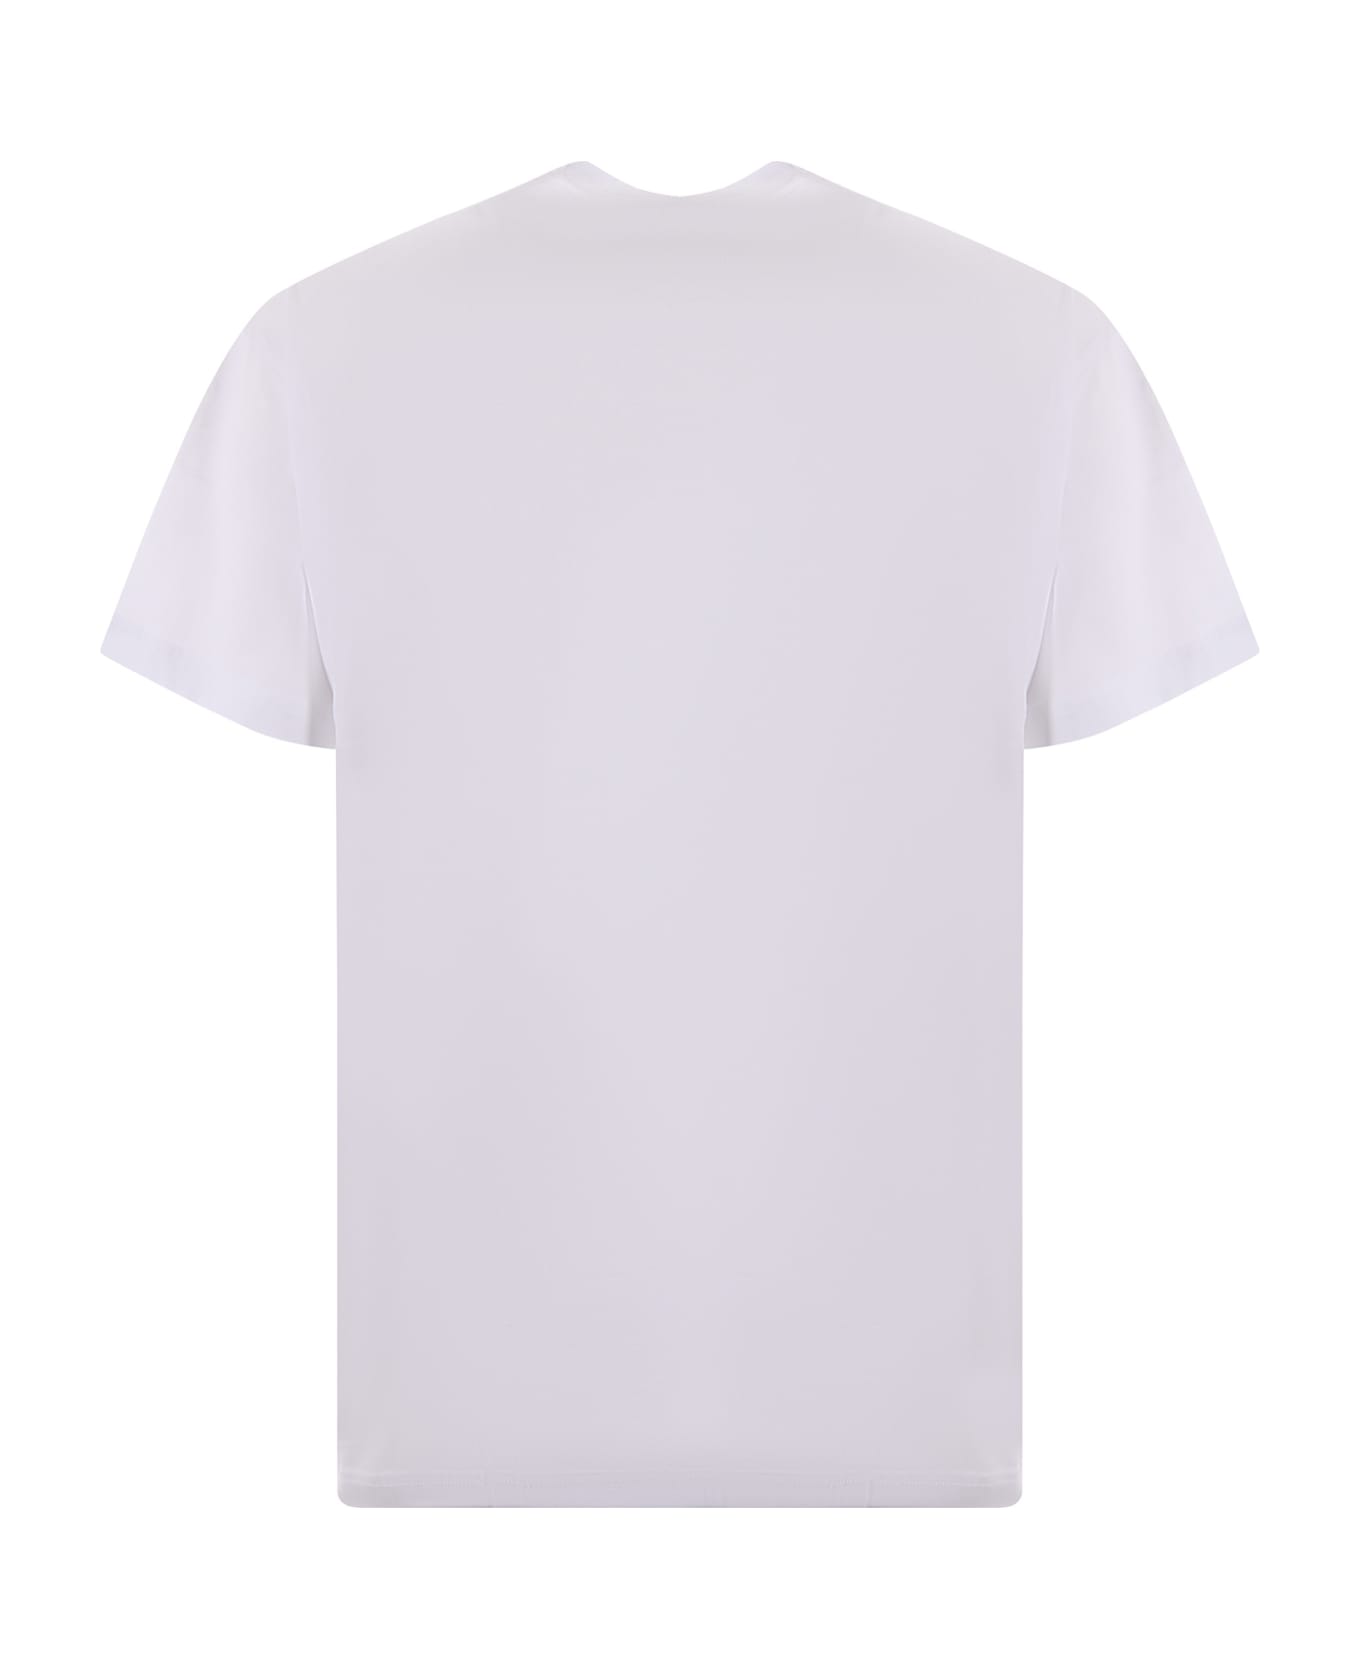 Versace Jeans Couture T-shirt - Bianco/blu